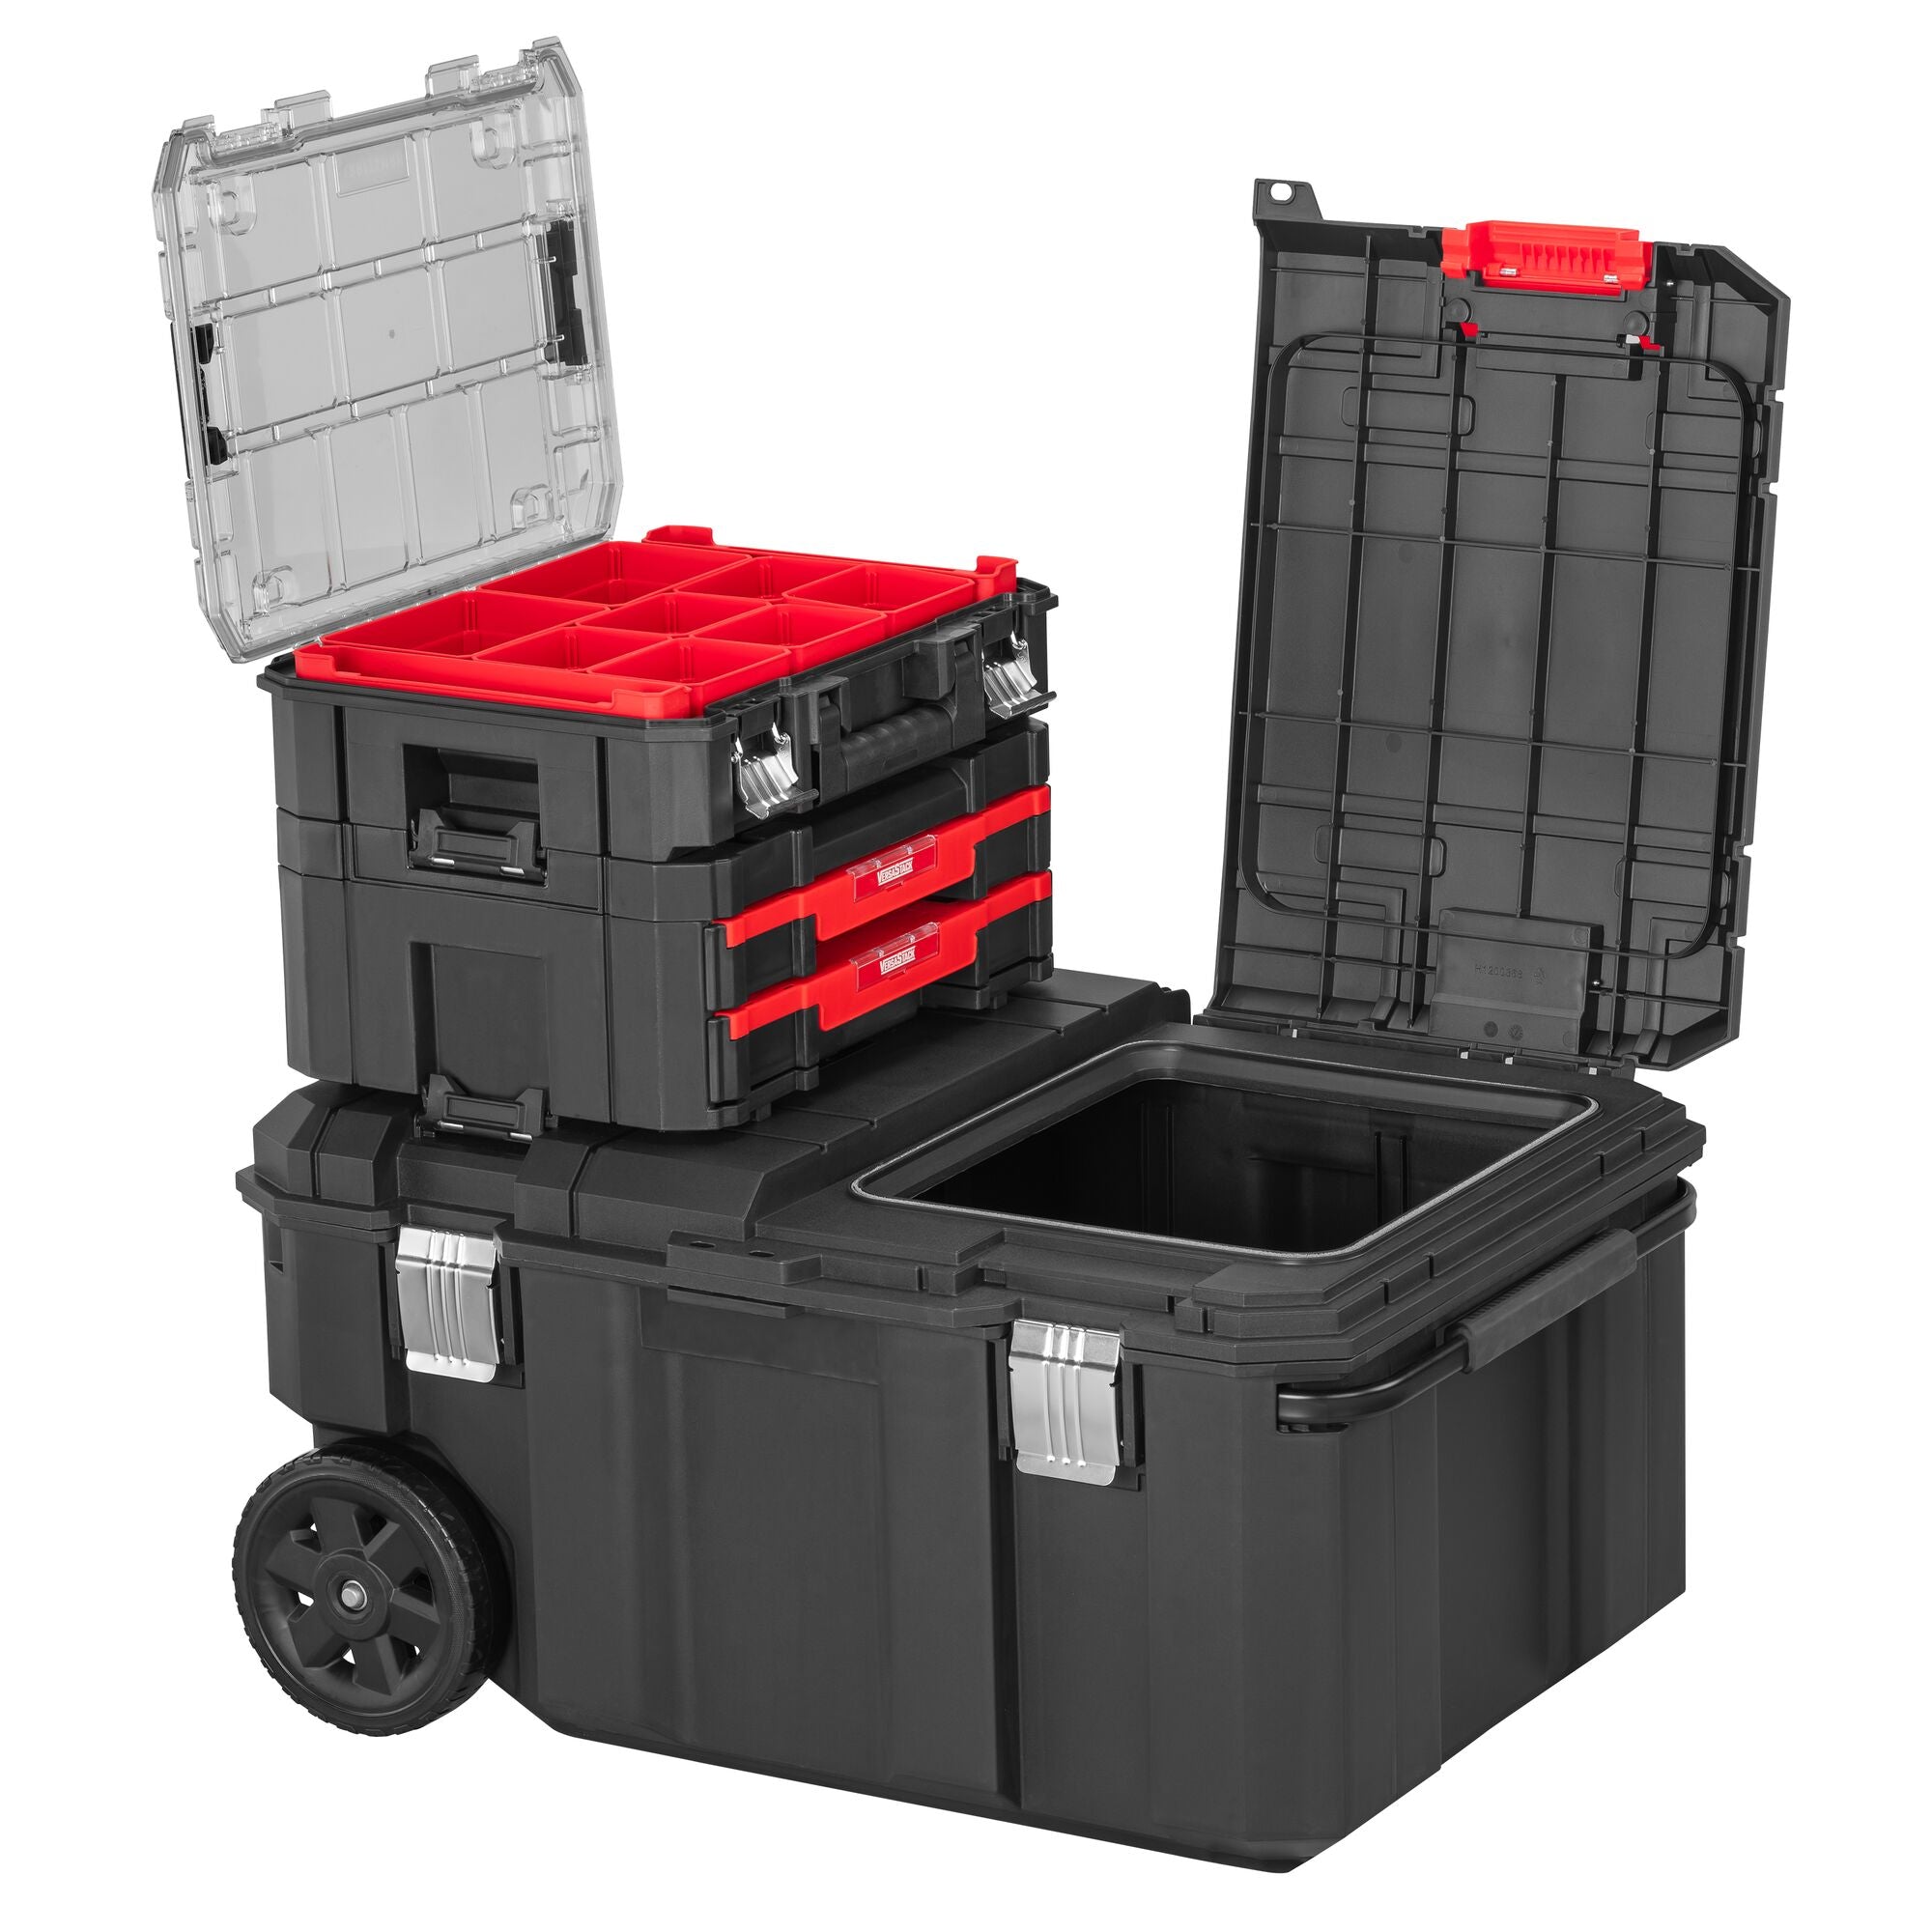 CRAFTSMAN VERSASTACK 30 Gallon Chest with additional VERSASTACK products attached